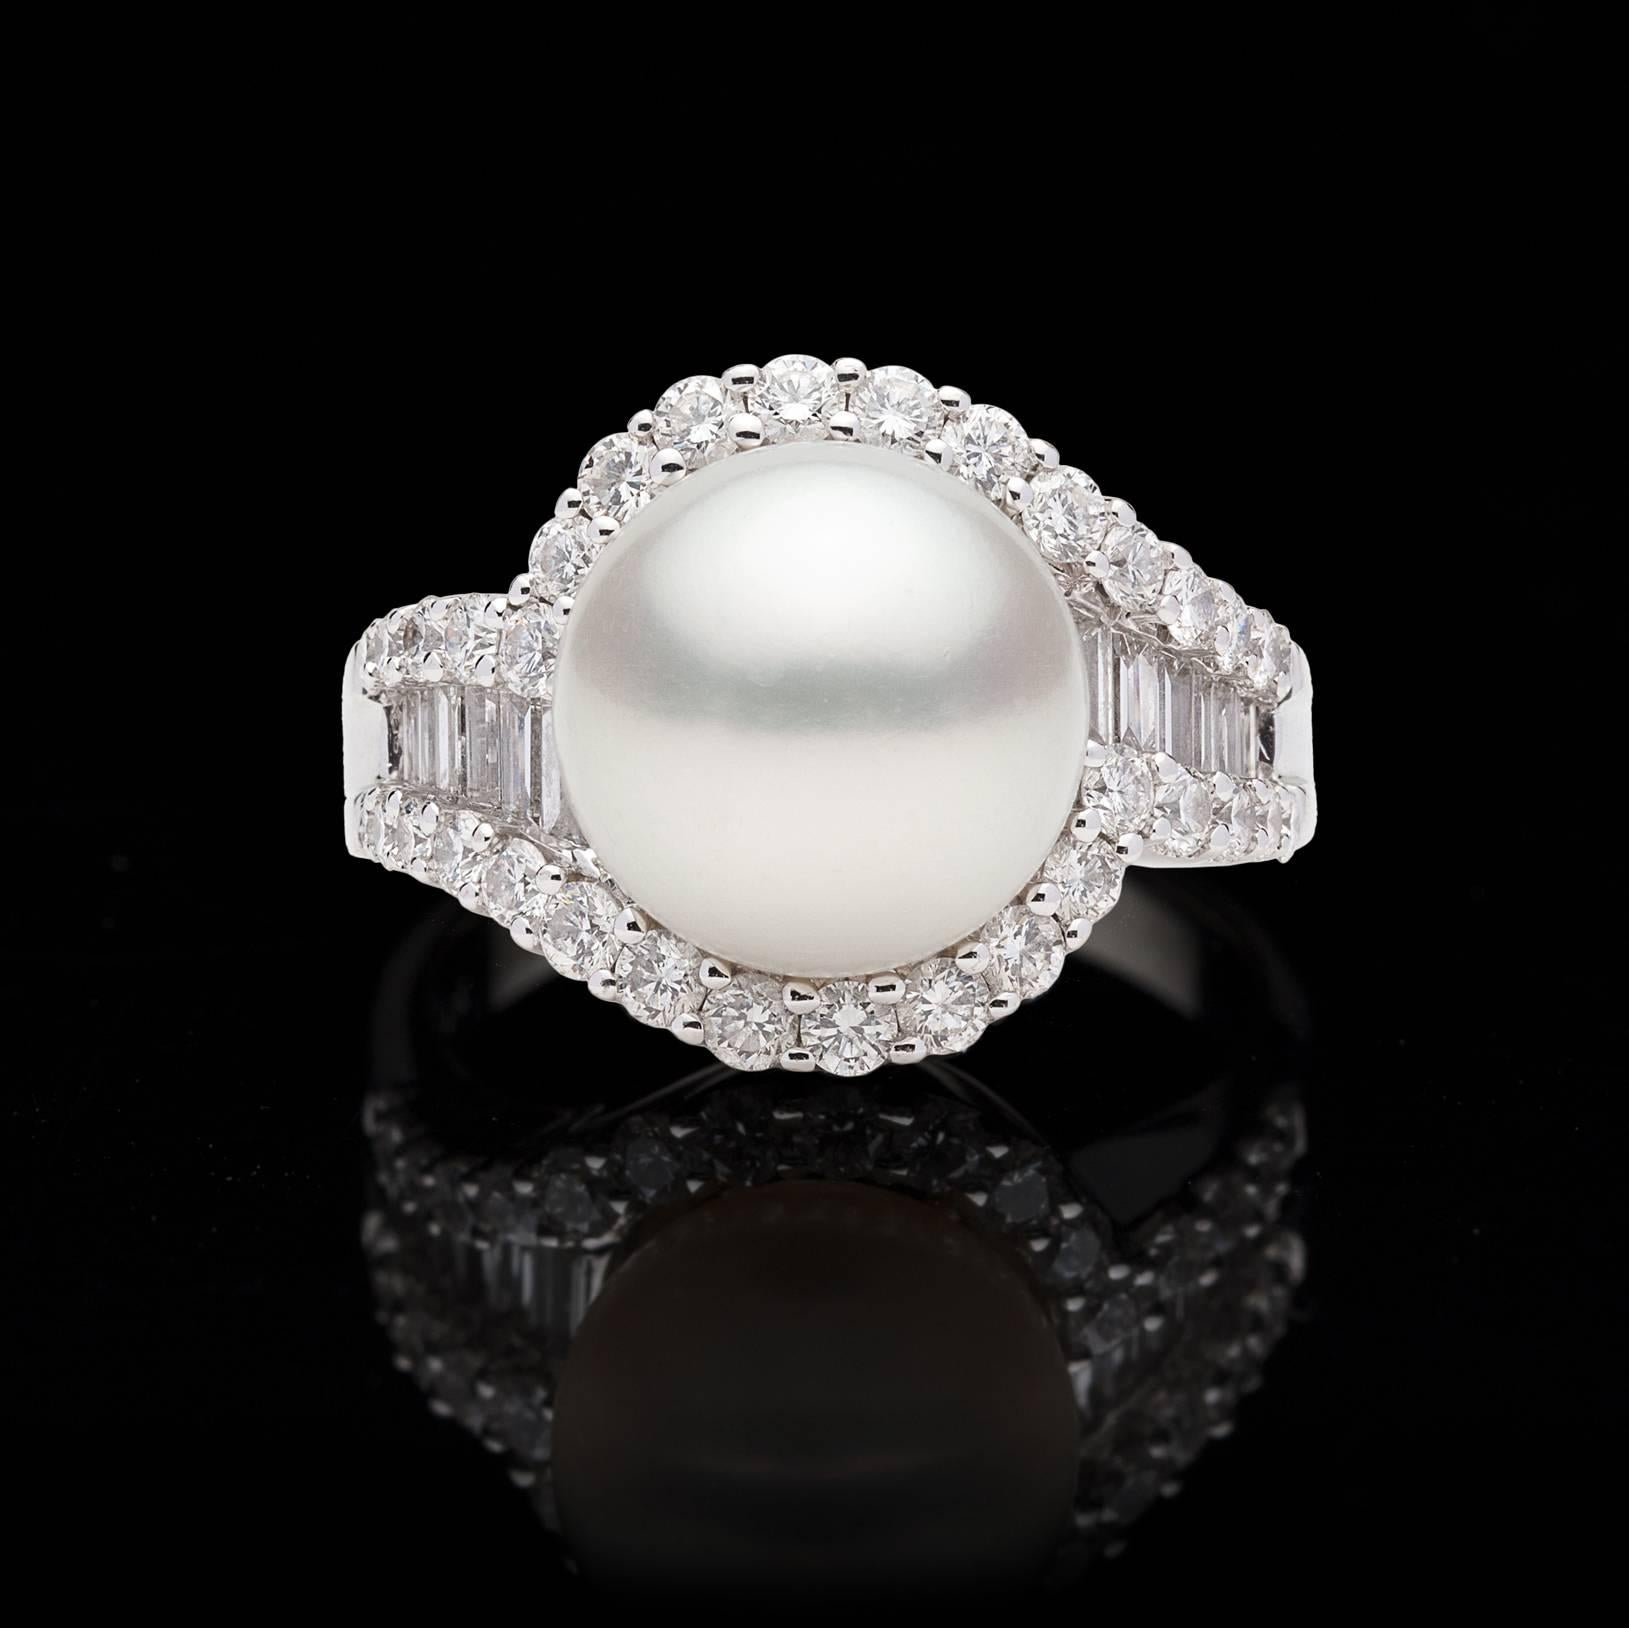 A wonderful statement piece that epitomizes beauty. One high luster pearl that measures 11.3mm is surrounded by a carat of fine white round and baguette cut diamonds. Set in 18kt white gold, this elegant ring weighs 9.5 grams. Currently a size 8.0,